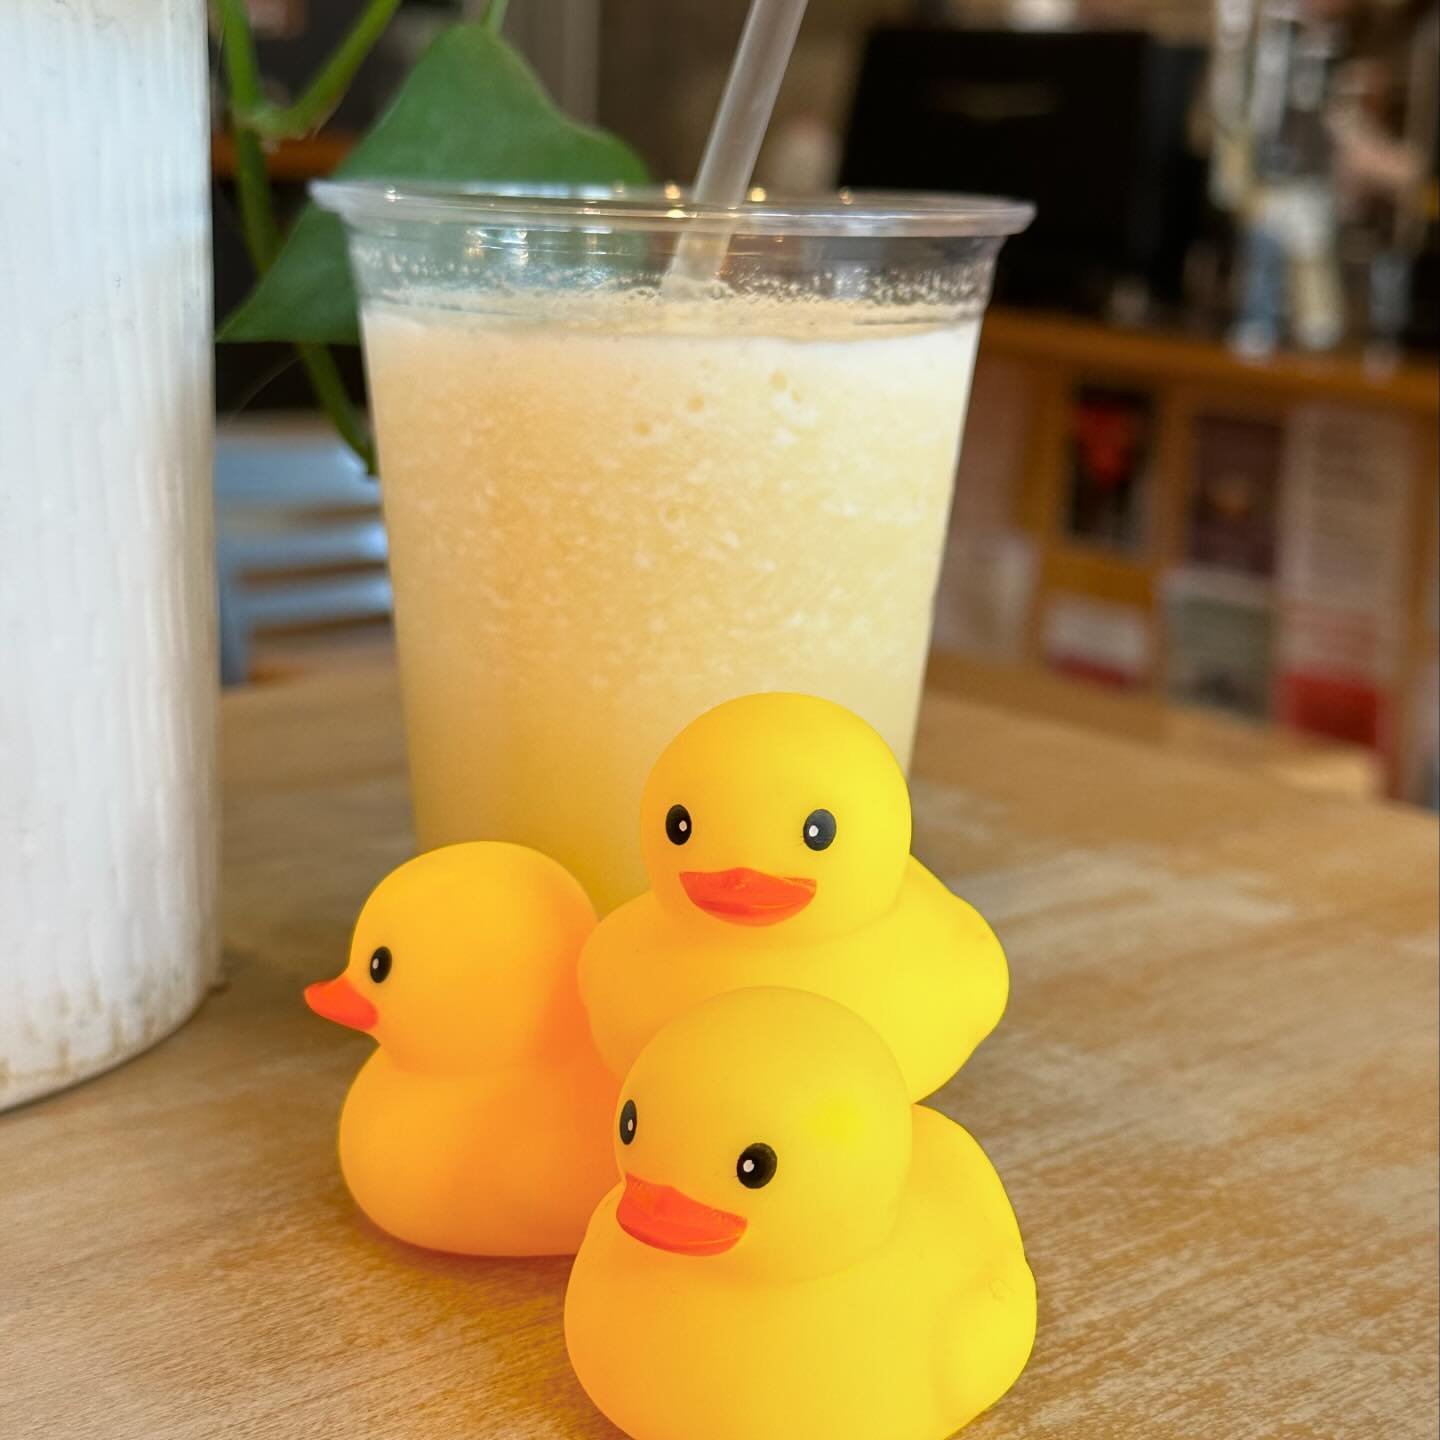 We are feeling Just Ducky! Stop in for some fun at NPC and all around Downtown Petoskey this weekend. We have a frozen Lavender Lemonade on special and a fun activity for kids on Saturday 🍋💜🍋

@downtownpetoskey @petoskeyarea @petoskeychamber @nort